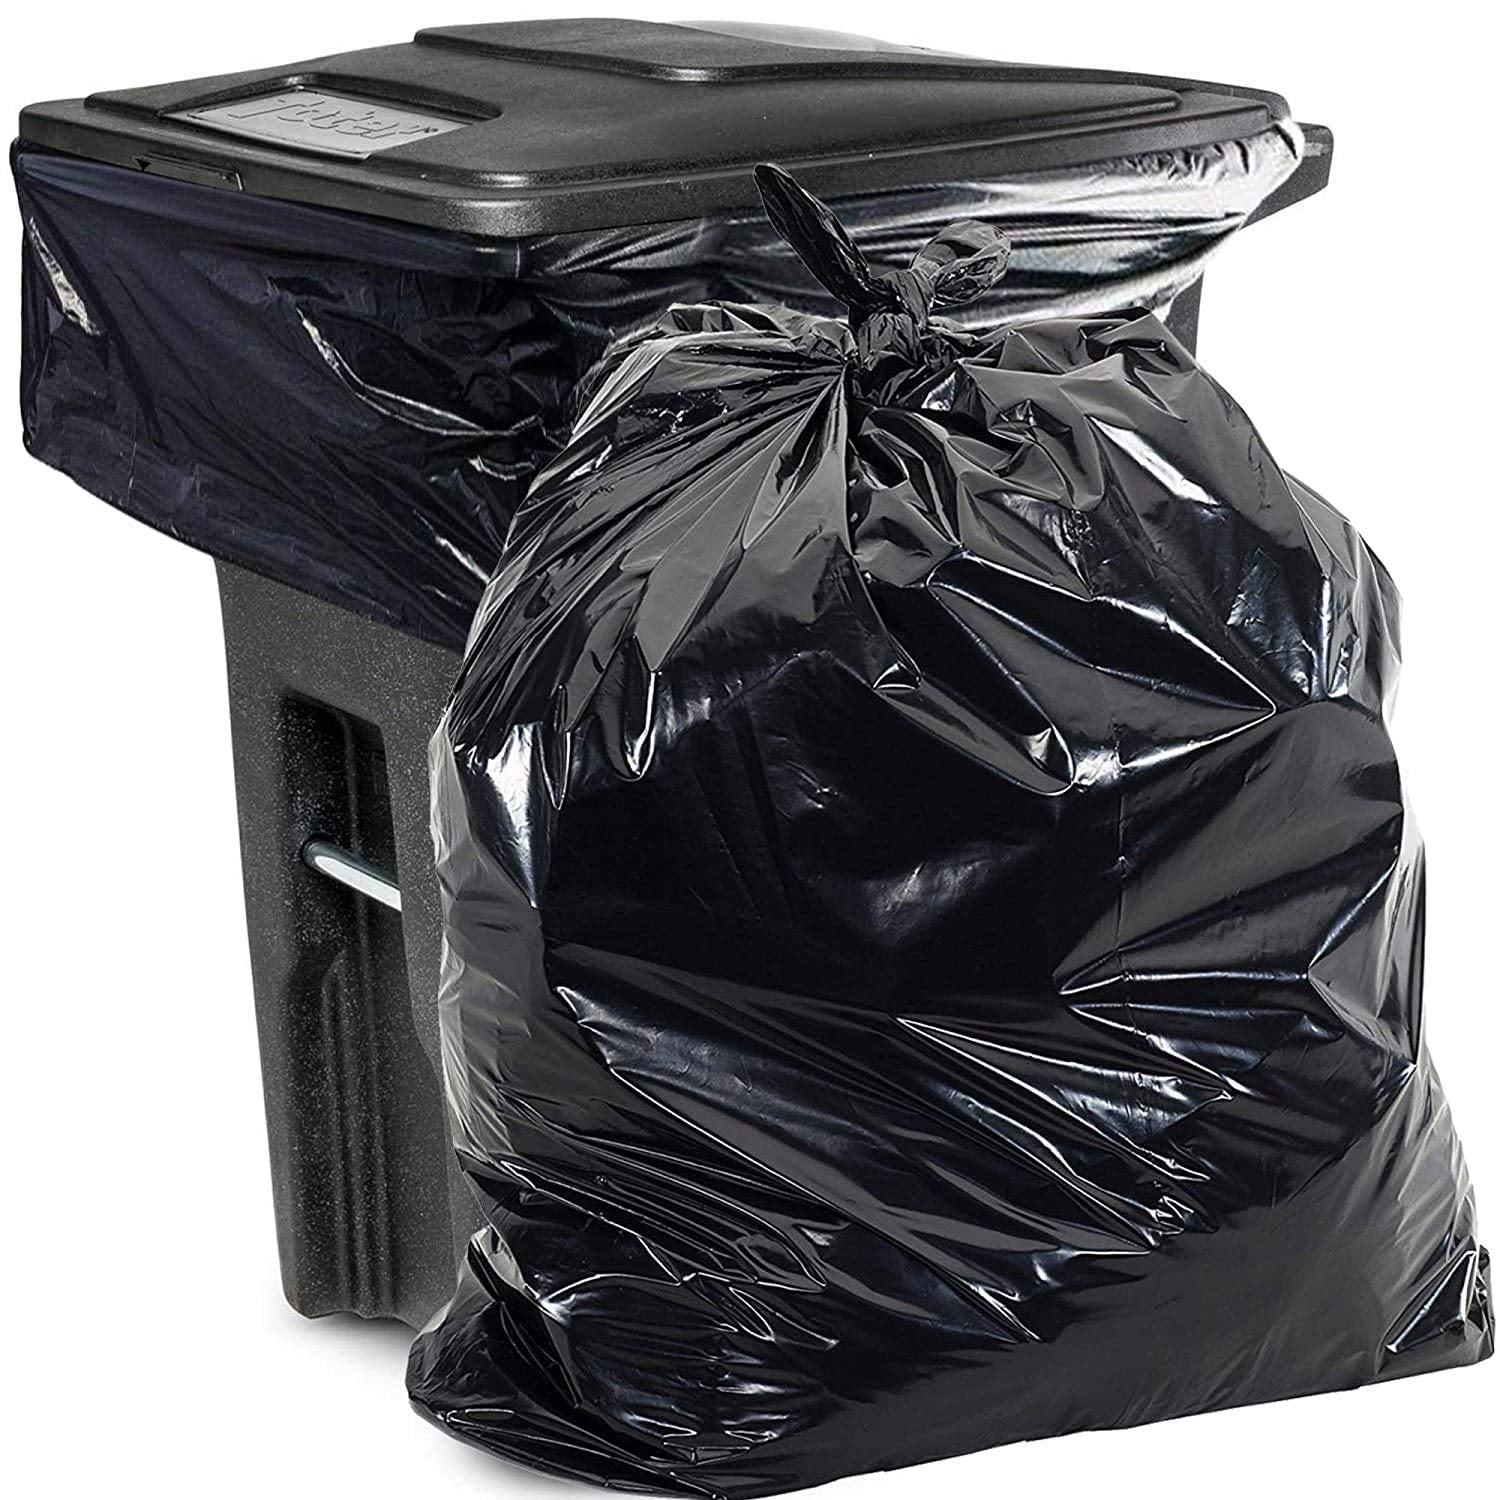 Ultrasac Contractor Trash Bags 50 Pack/W Ties Heavy Duty 3 MIL BLACK 33 Gallons 